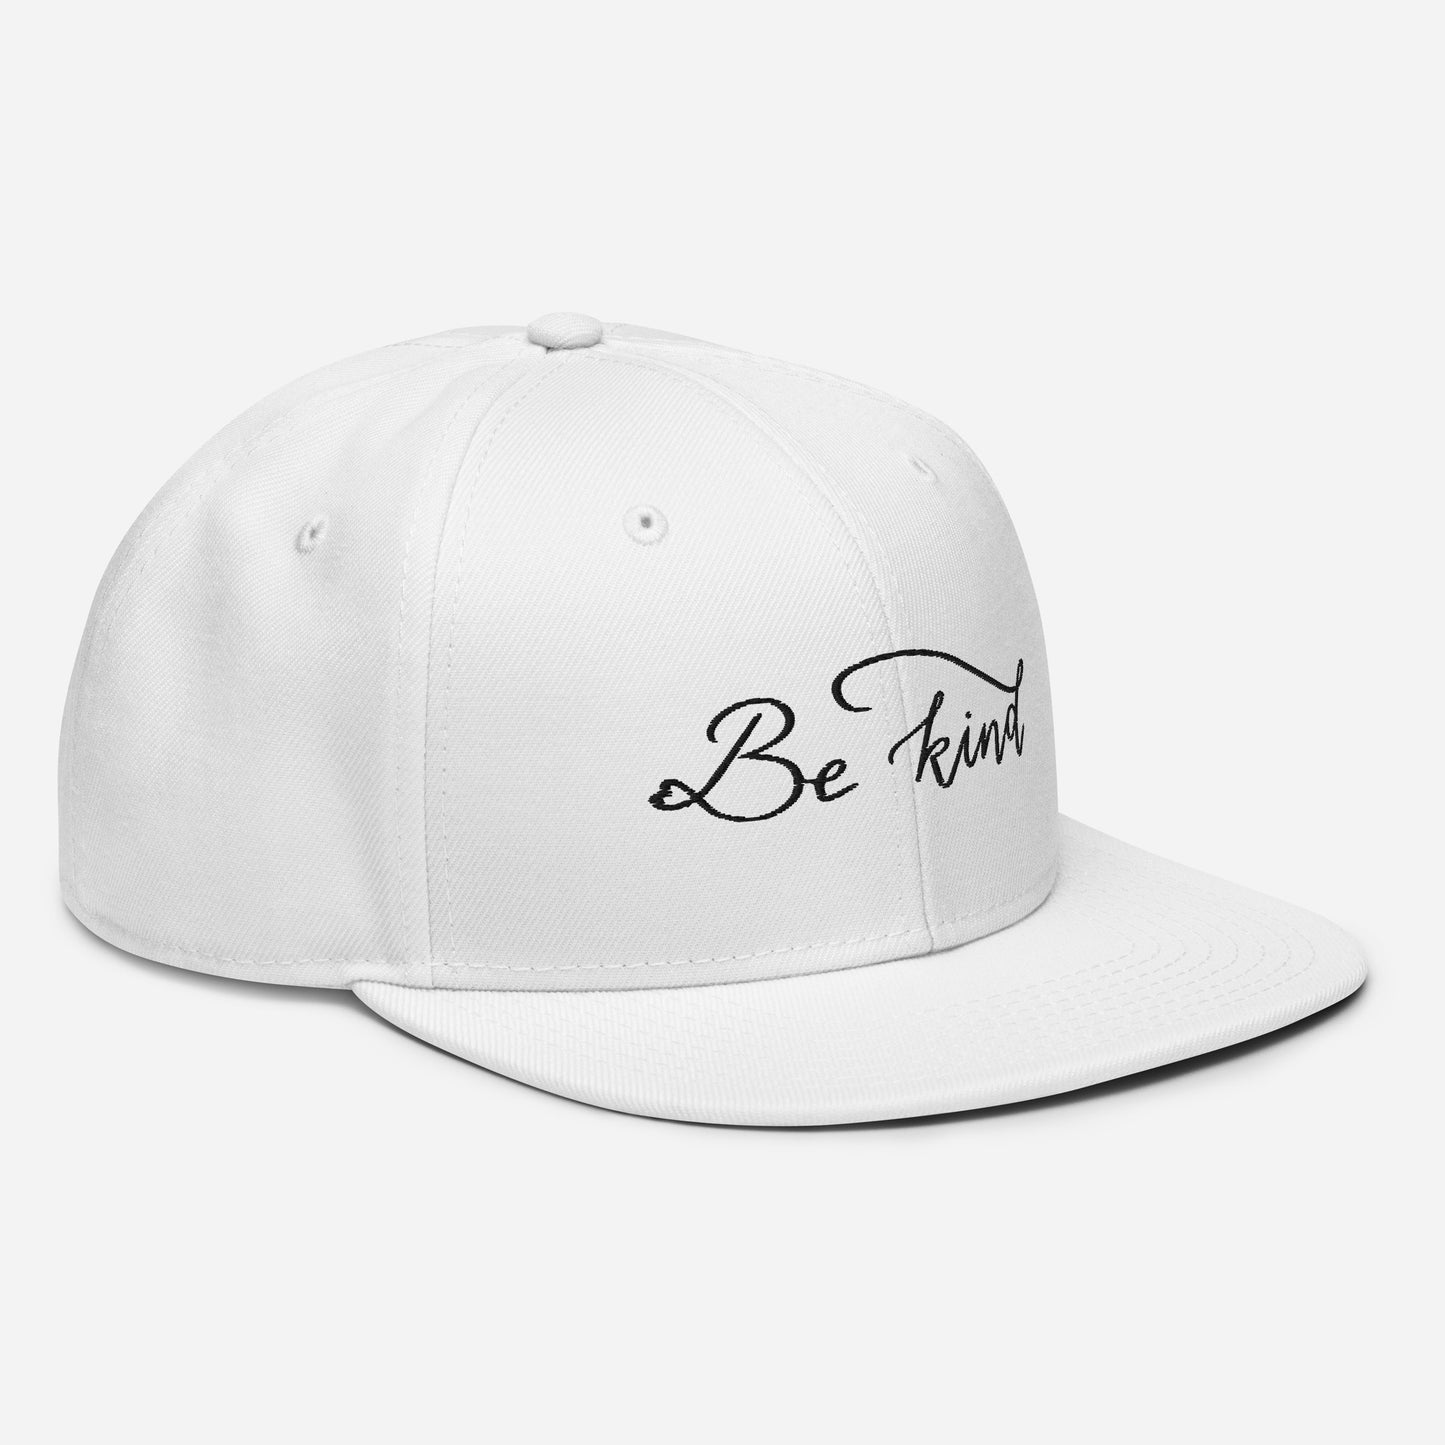 Embroidered snapback hat "Be kind"